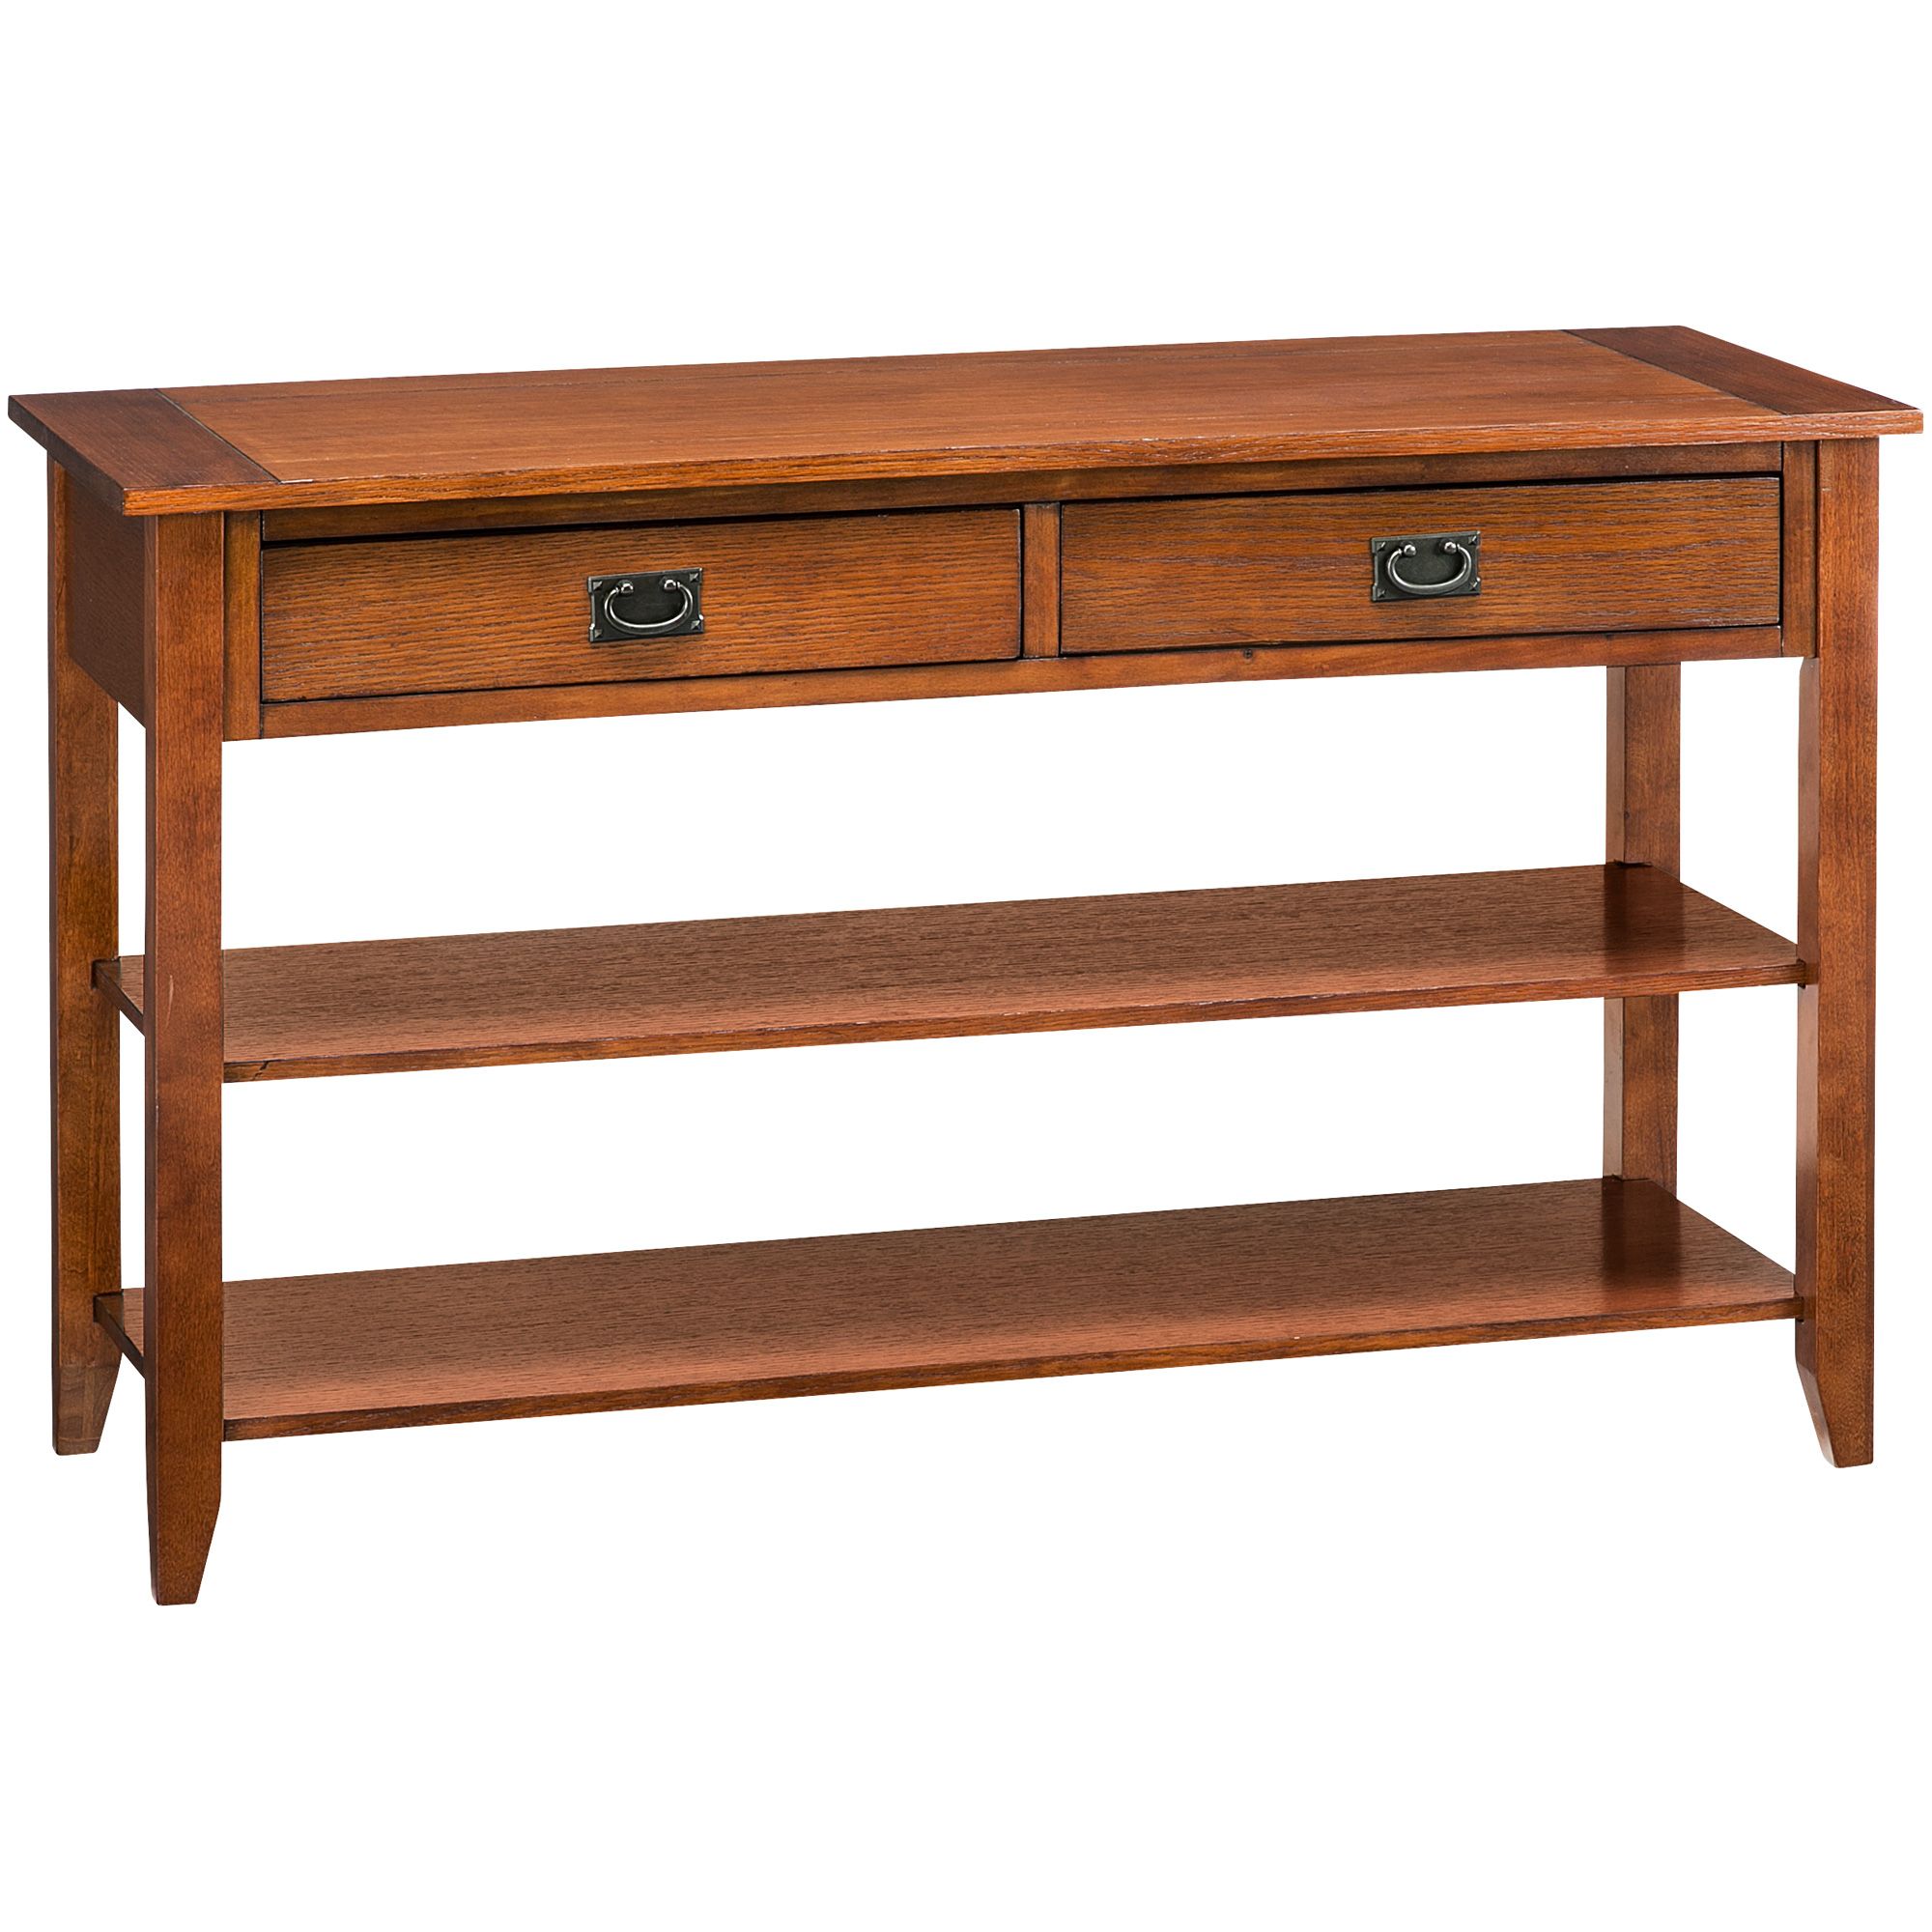 Slumberland Furniture | Rutledge Mission Oak Console Table With Regard To Latest Rutledge Sideboards (View 15 of 20)